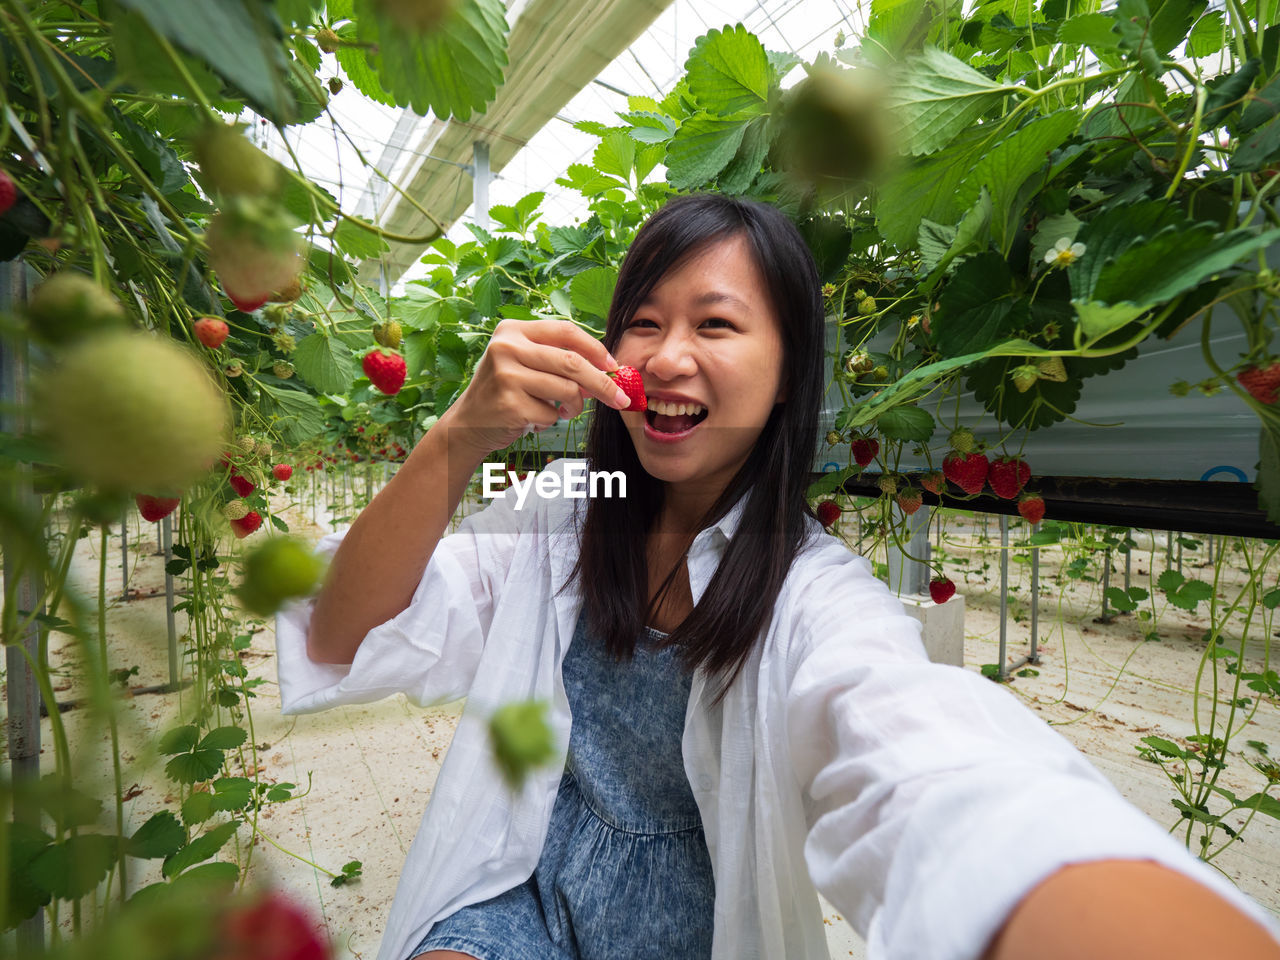 Portrait of cheerful woman eating strawberries in greenhouse